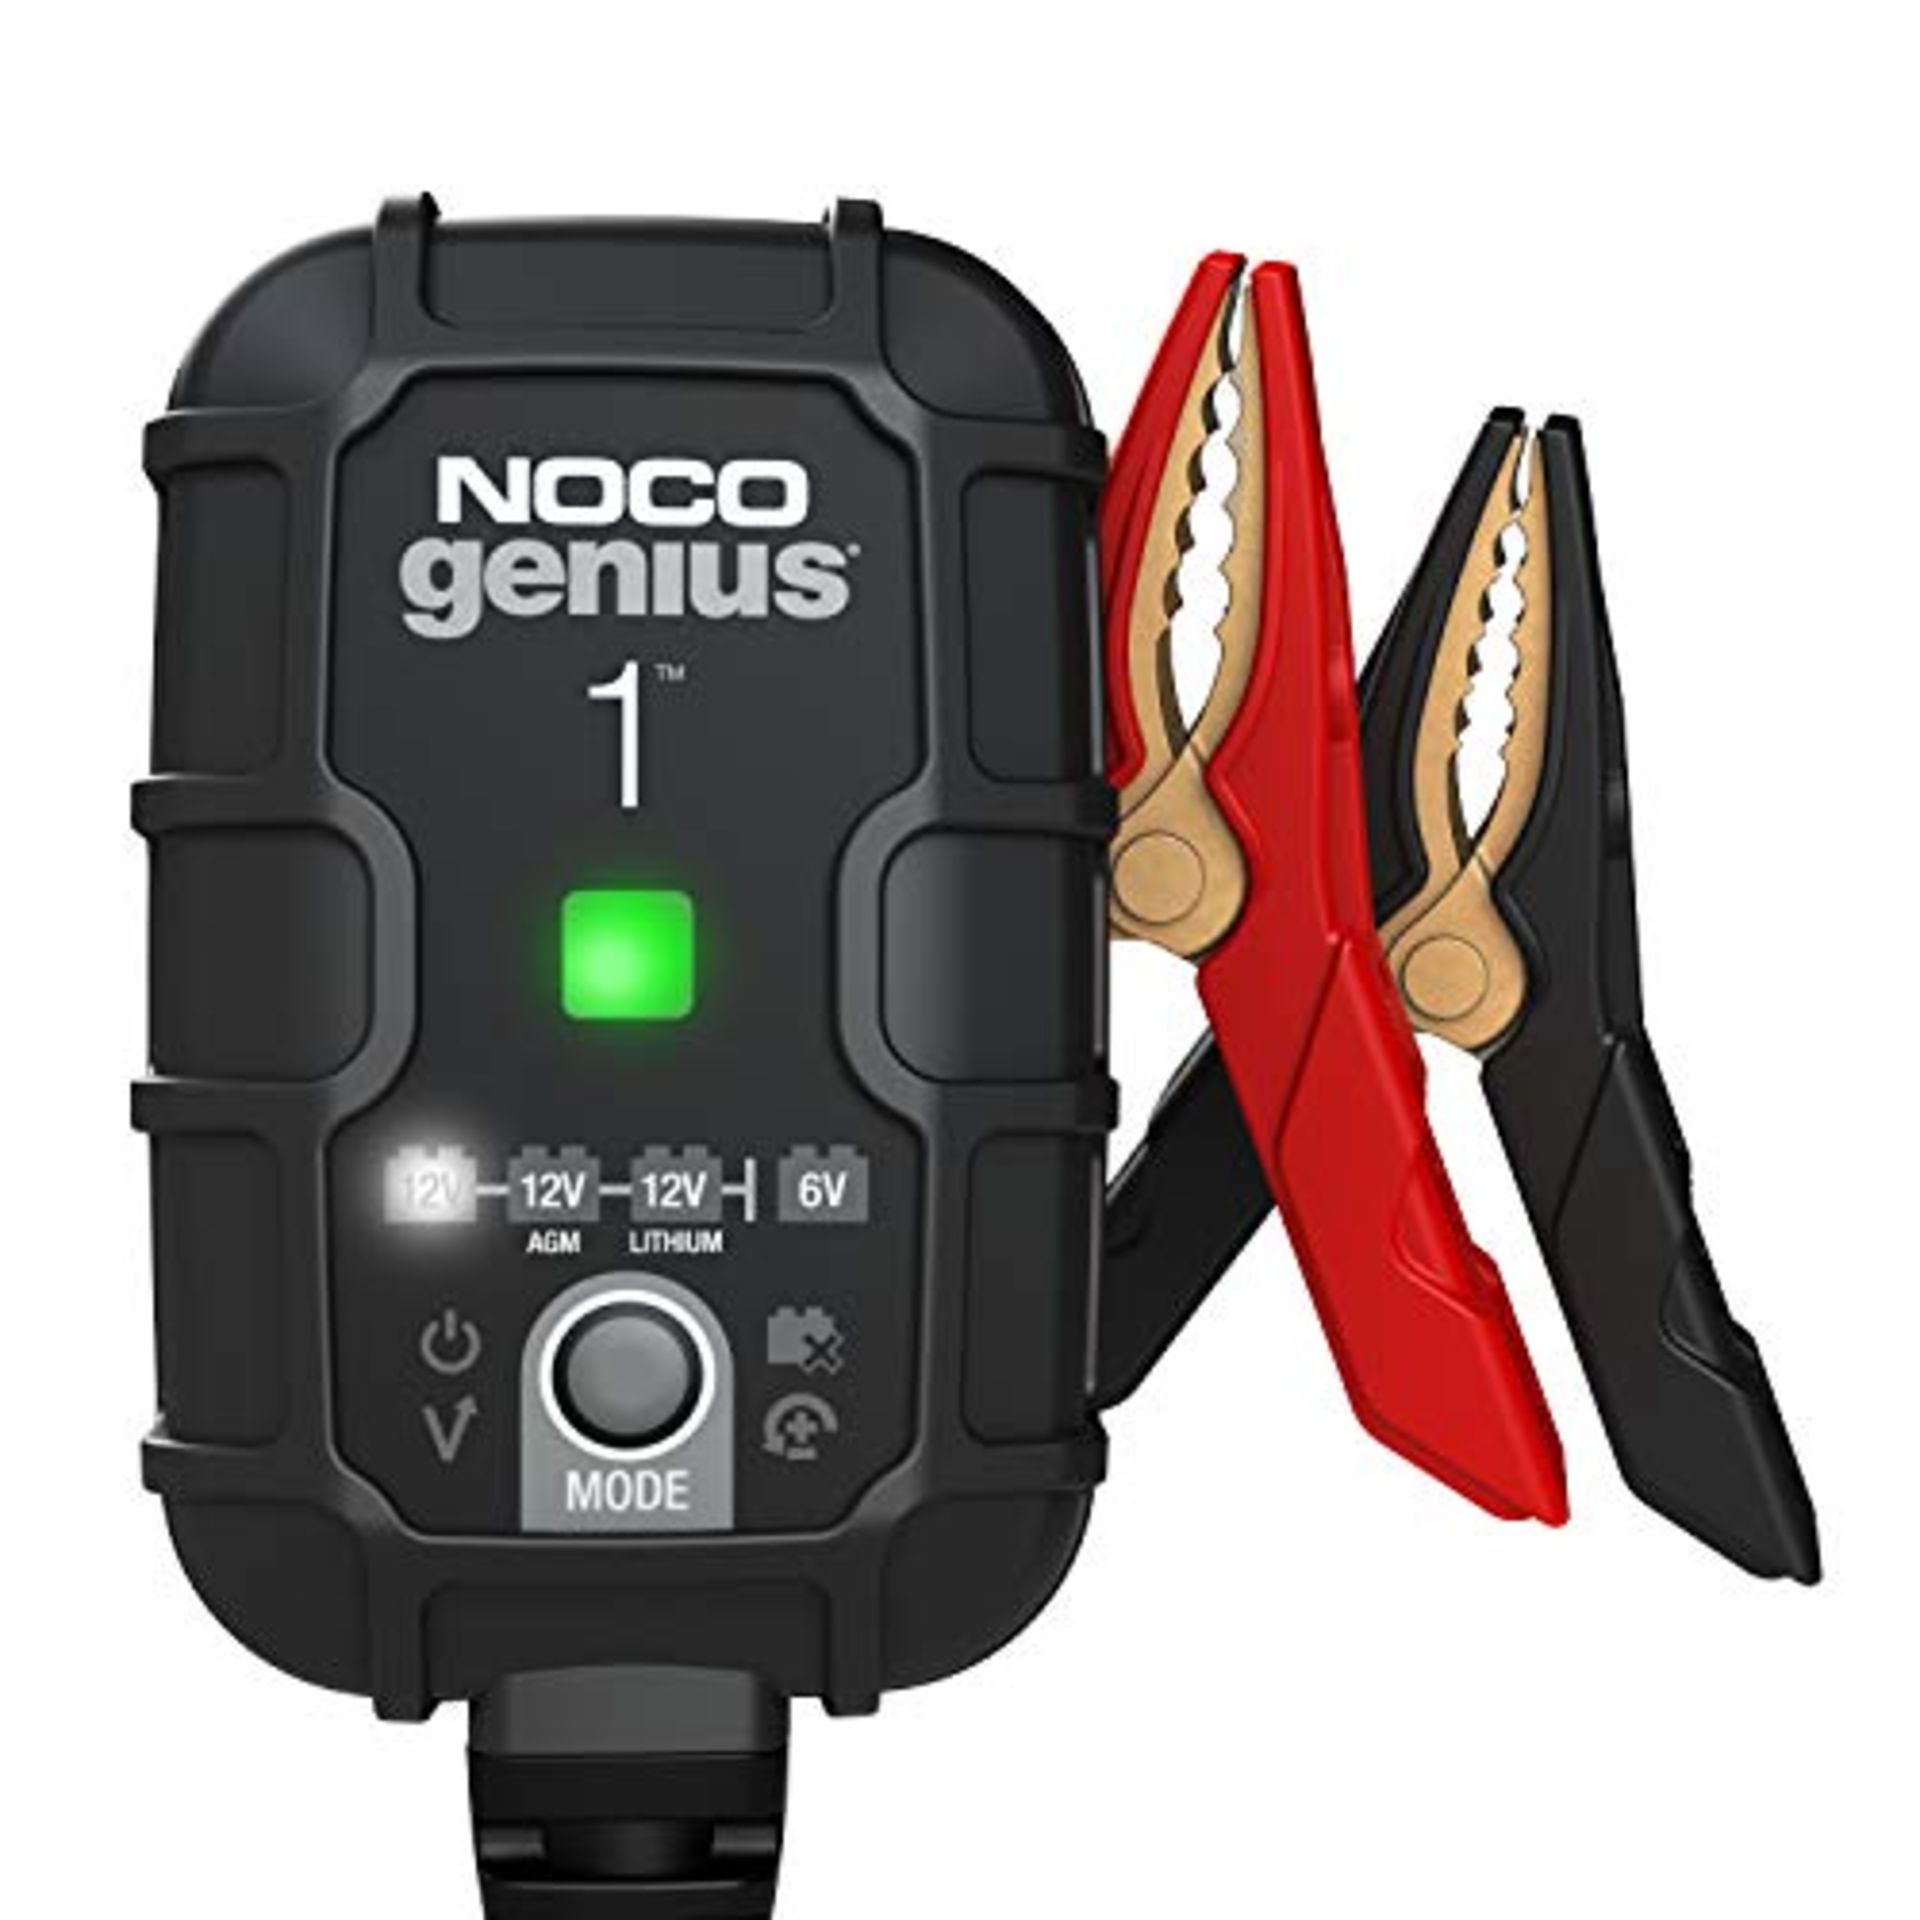 NOCO GENIUS1UK, 1A Car Battery Charger, 6V and 12V Portable Smart Charger, Battery Mai